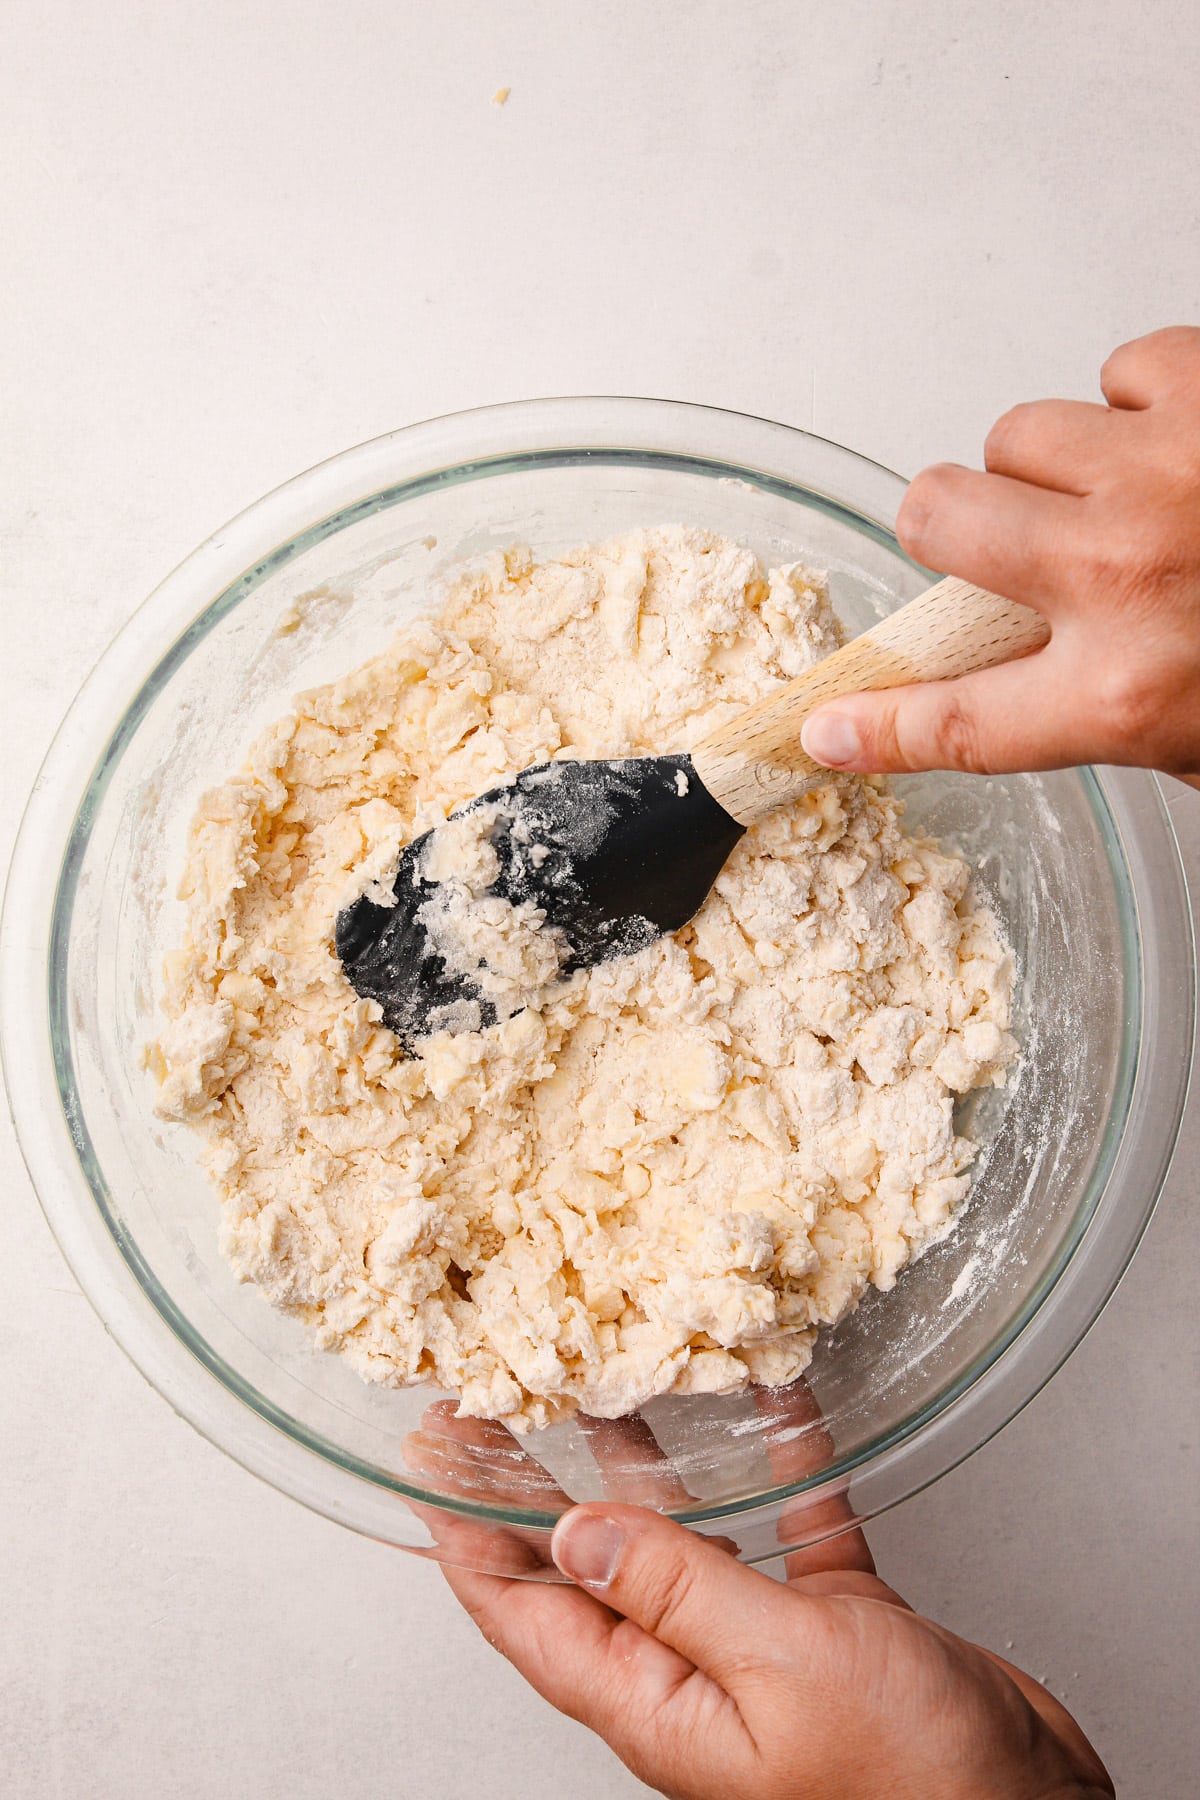 A hand using a rubber spatula to mix together butter pieces and a flour mixture in a glass bowl